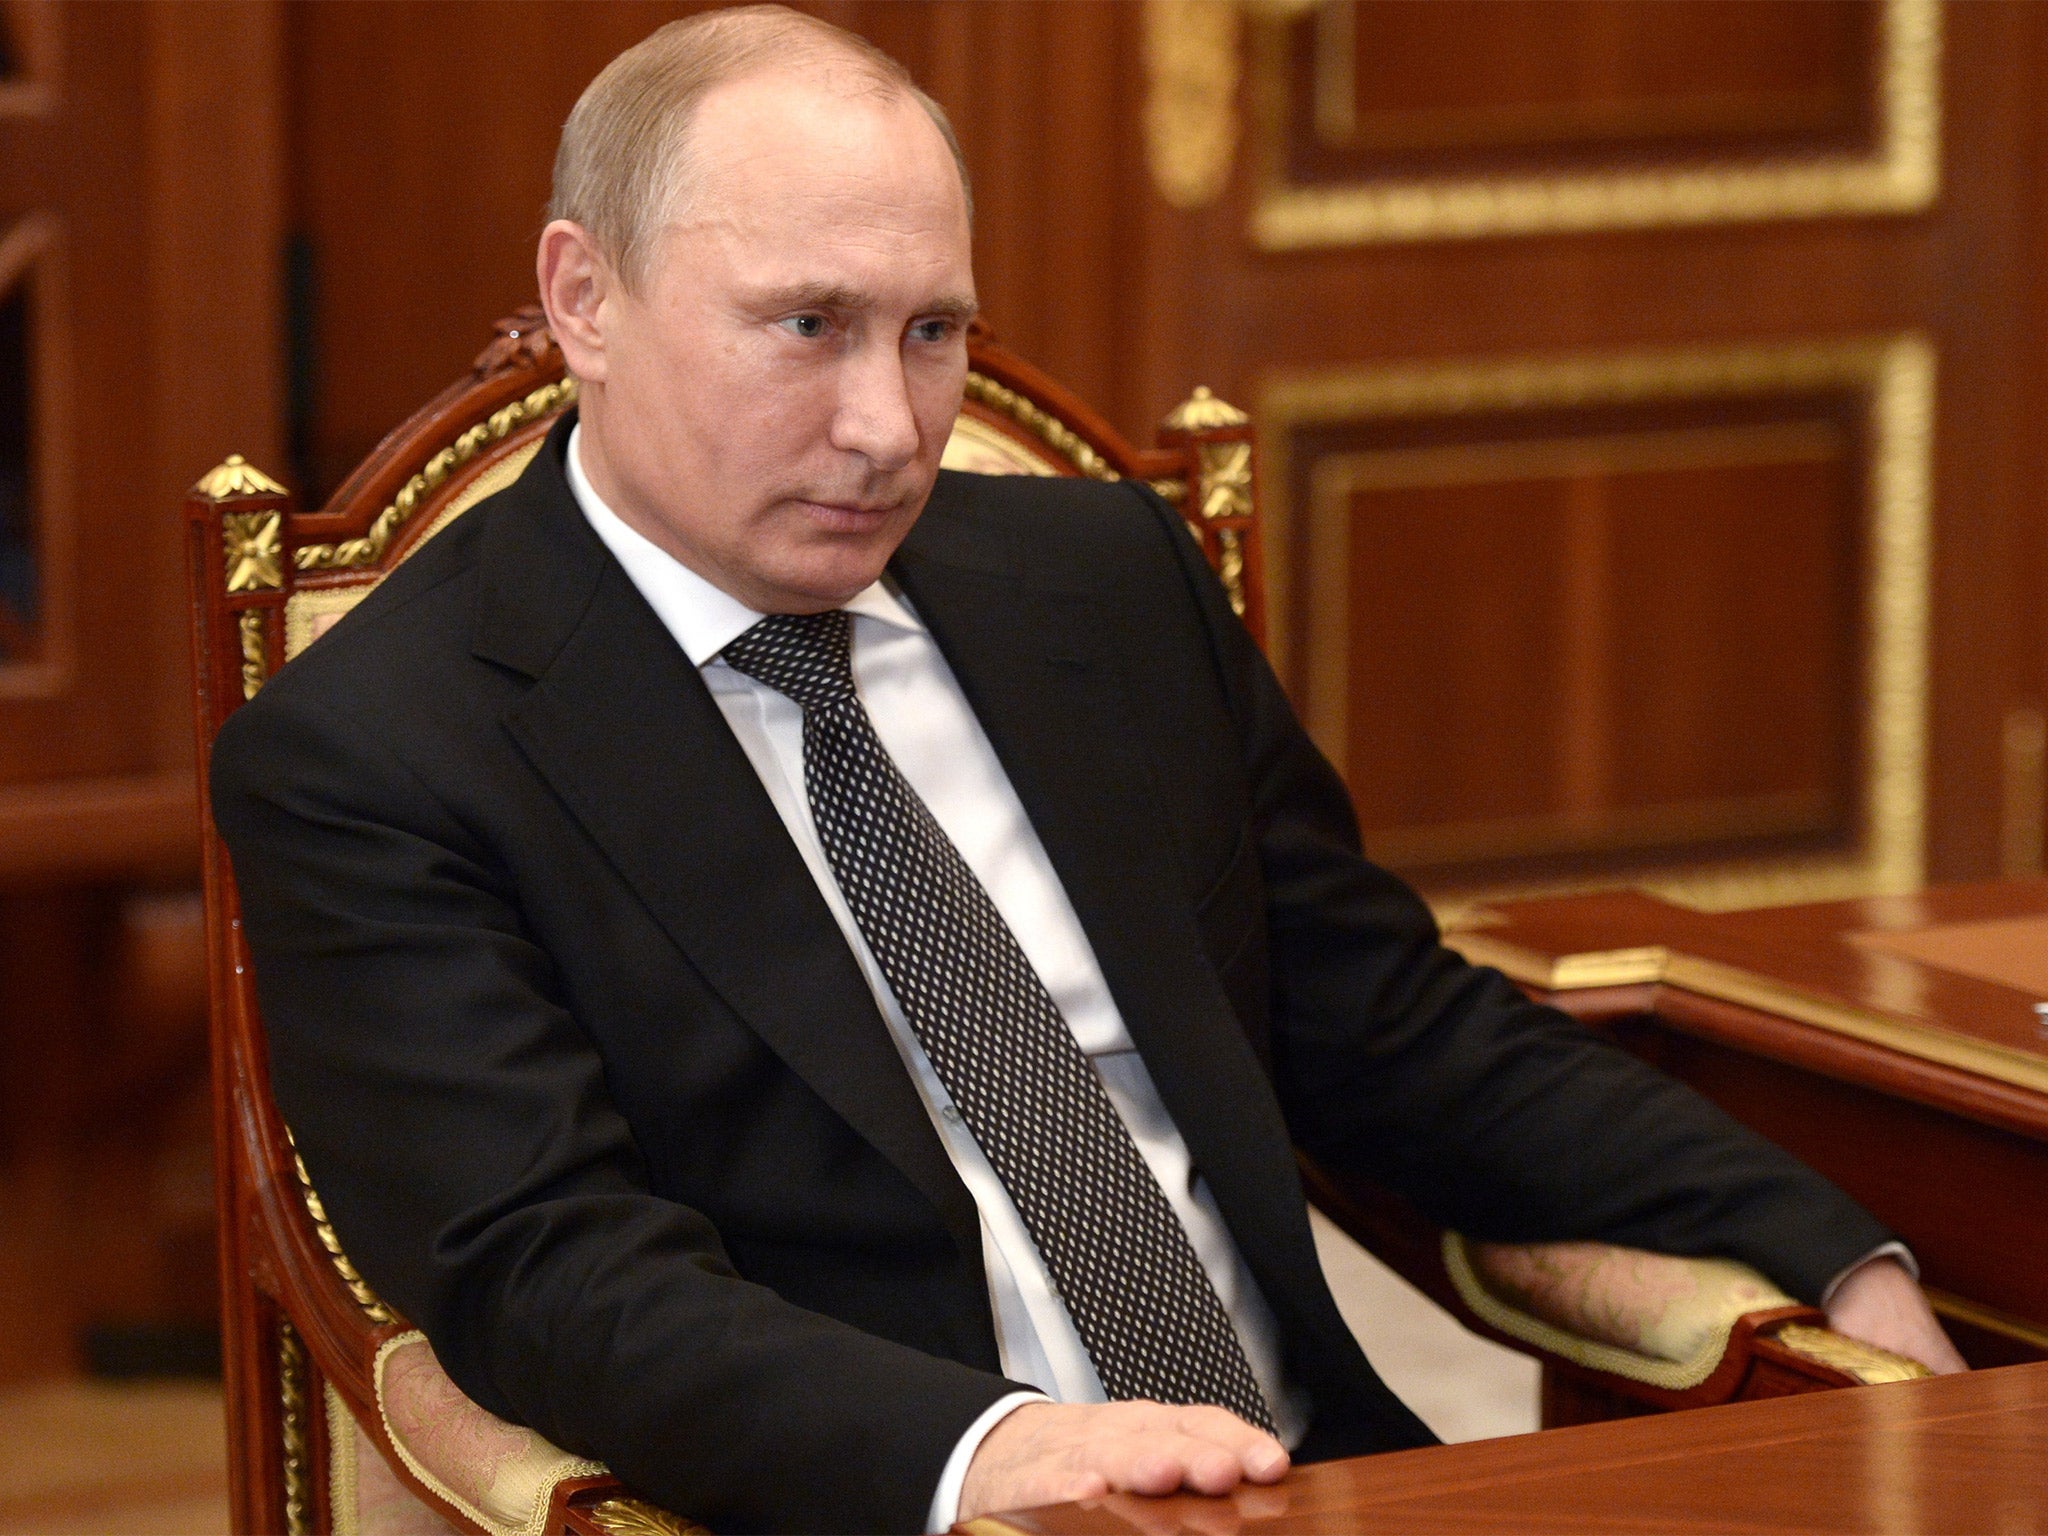 Vladimir Putin, pictured during a meeting in Moscow's Kremlin, on Tuesday